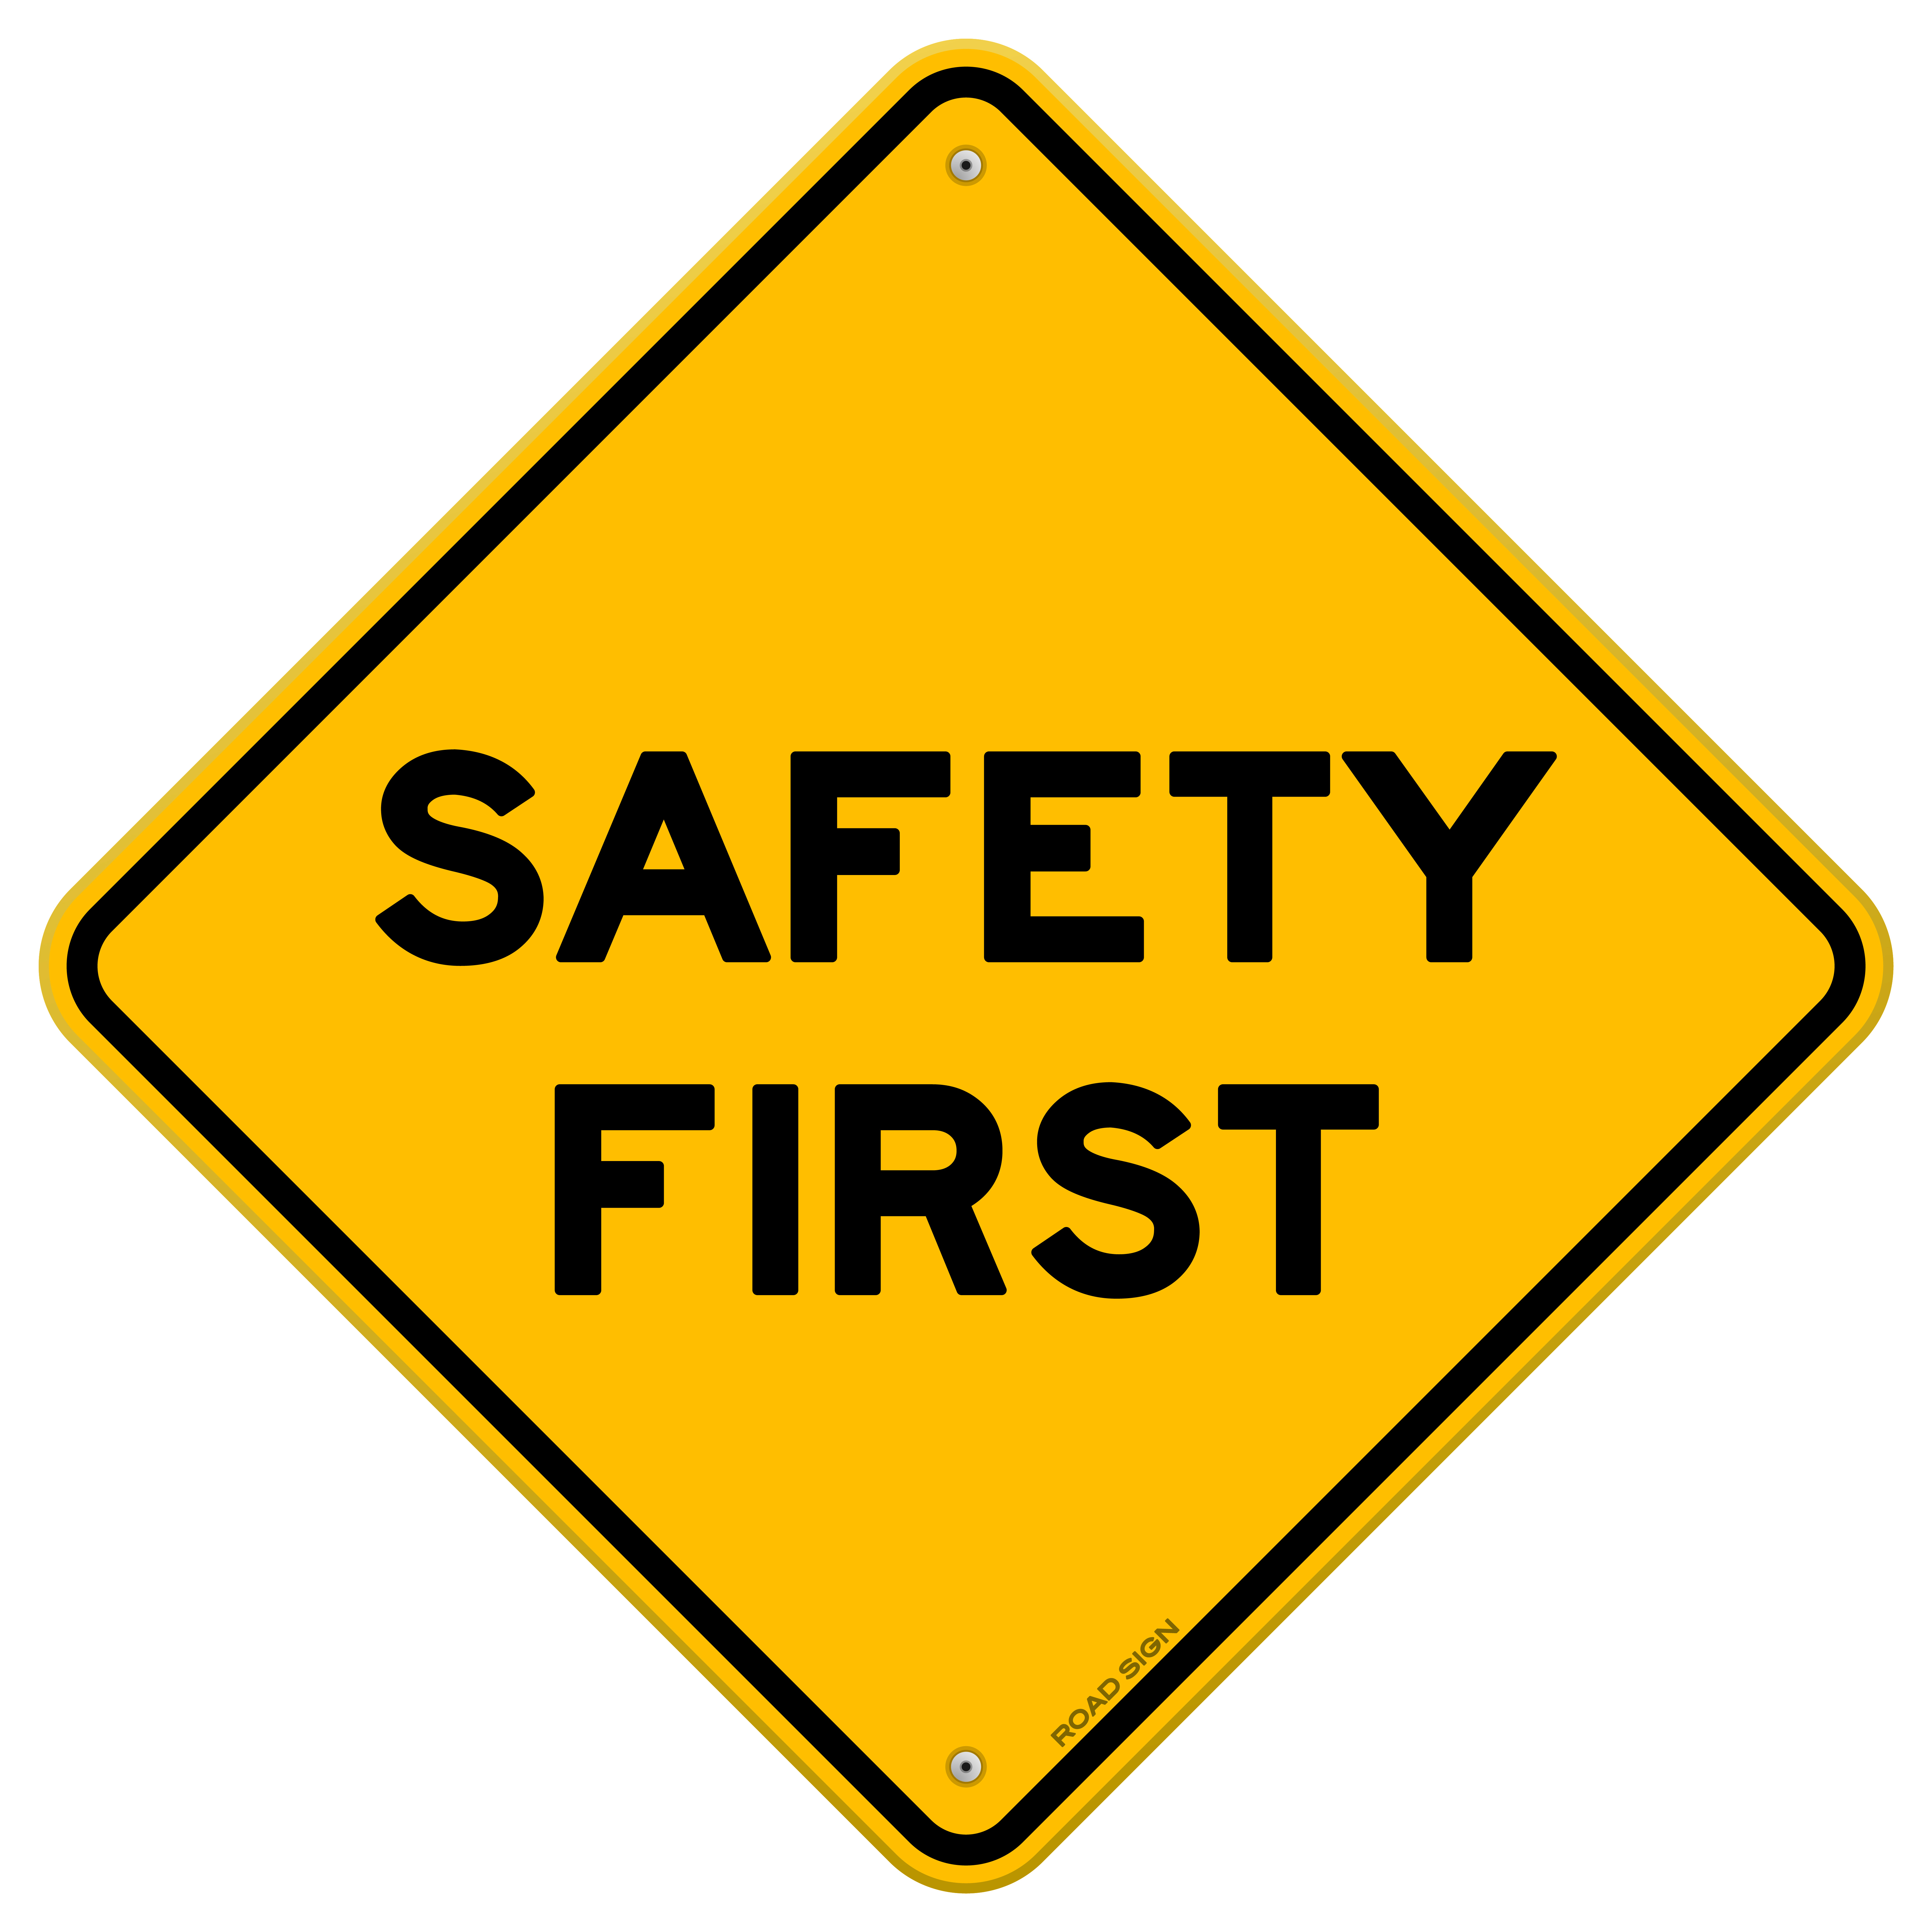 Put safety first with a BPIF H&S Healthcheck